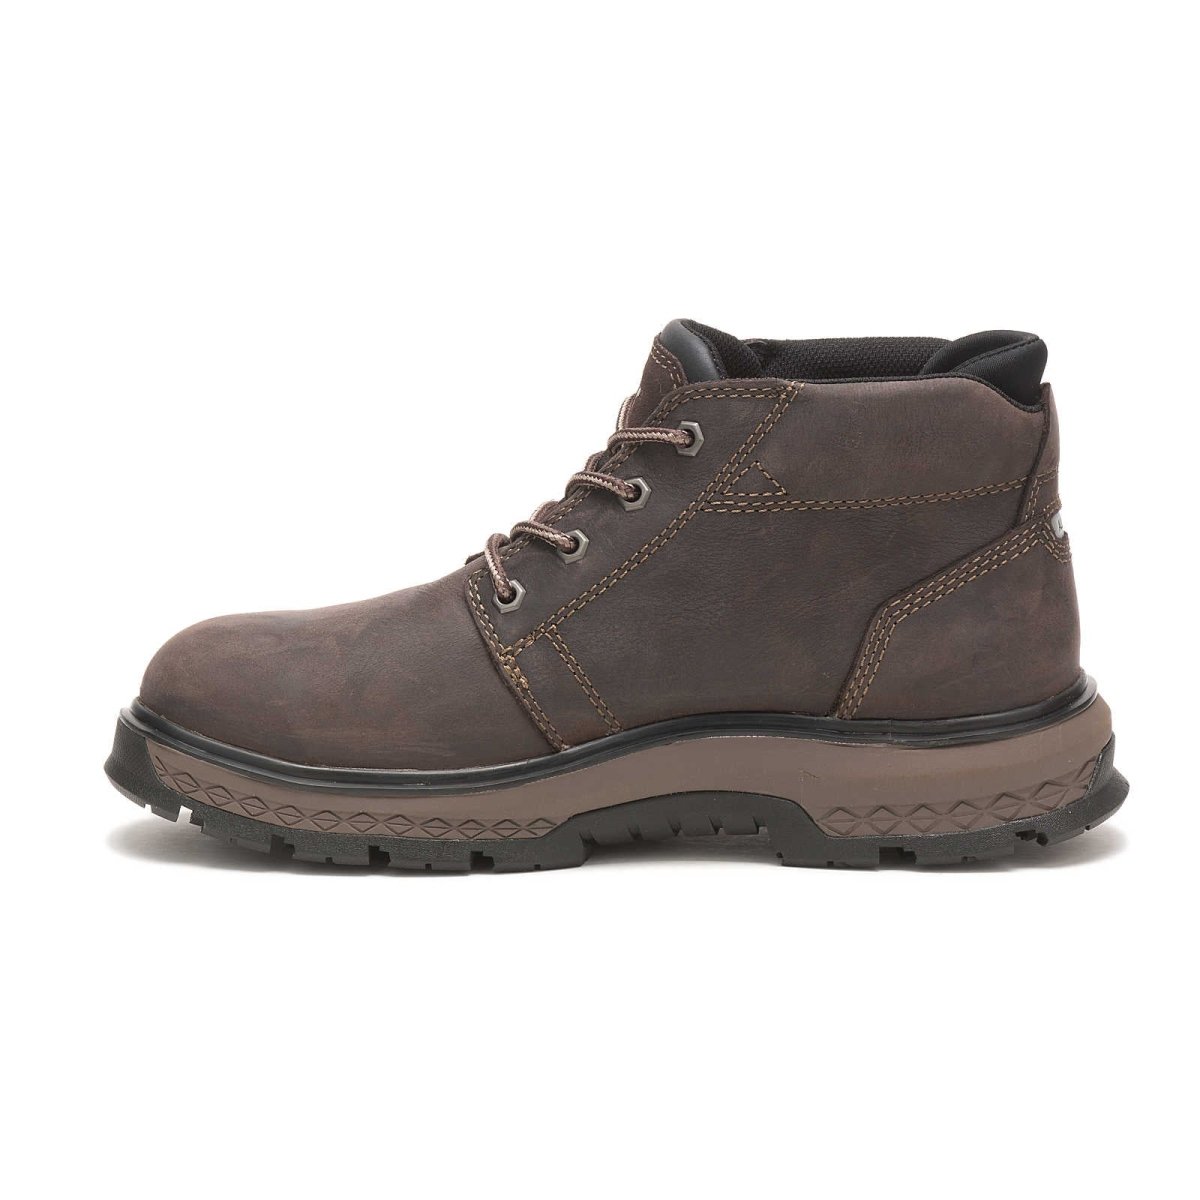 CATERPILLAR EXPOSITION 4.5" ALLOY TOE STATIC DISSIPATIVE WORK BOOT (P91367) IN DEMITASE - TLW Shoes